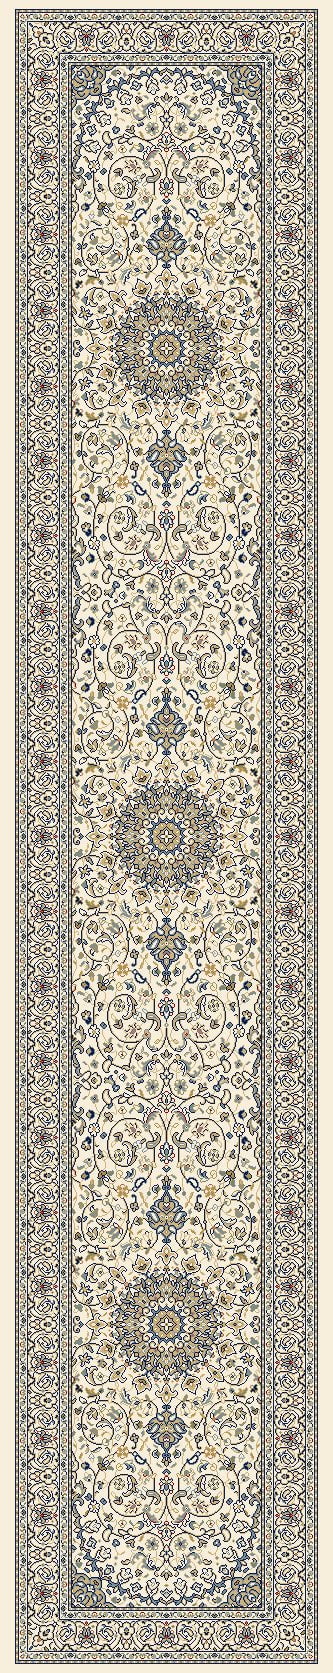 Dynamic Area Rugs Ancient Garden Area Rugs 57119-6464 Ivory 100% Poly Belgium 17 Sizes